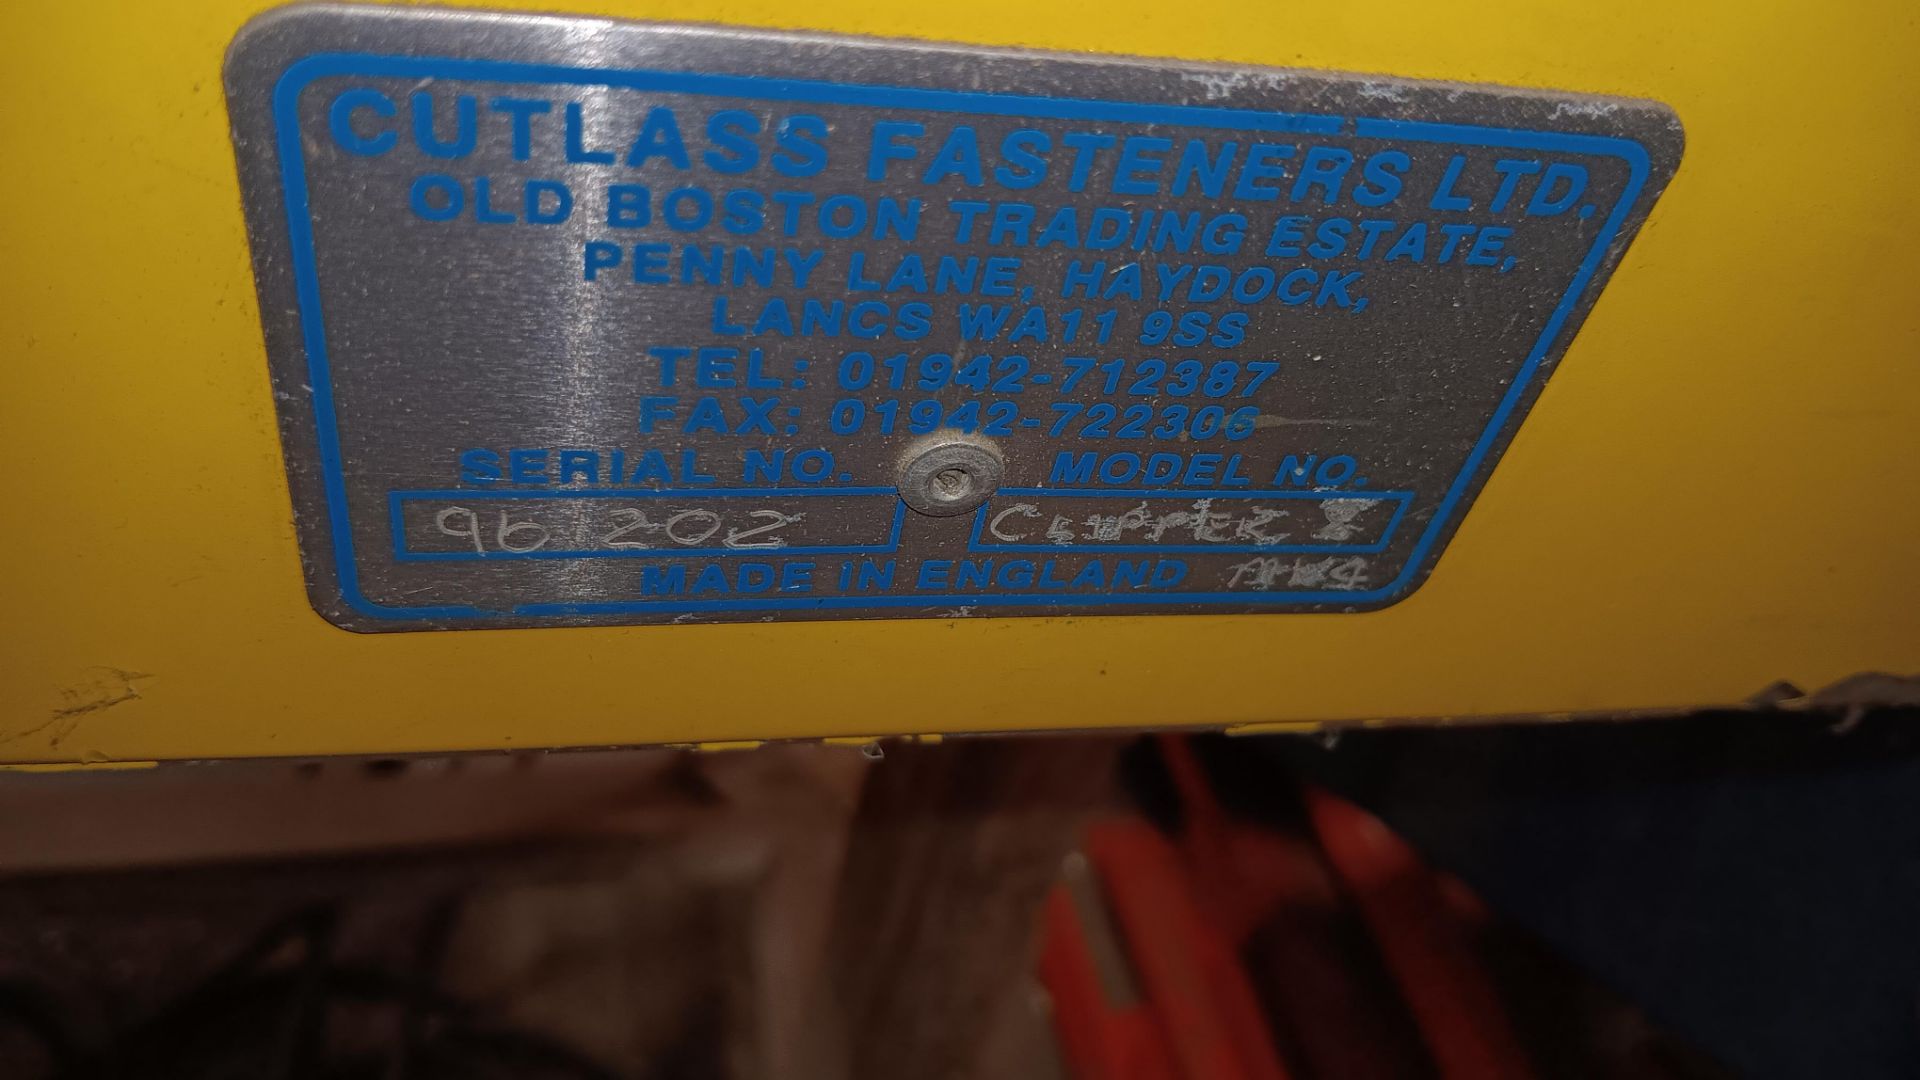 Cutless Fasteners Clipper 10 CD Stud welding system, serial number 96202 - Image 3 of 3